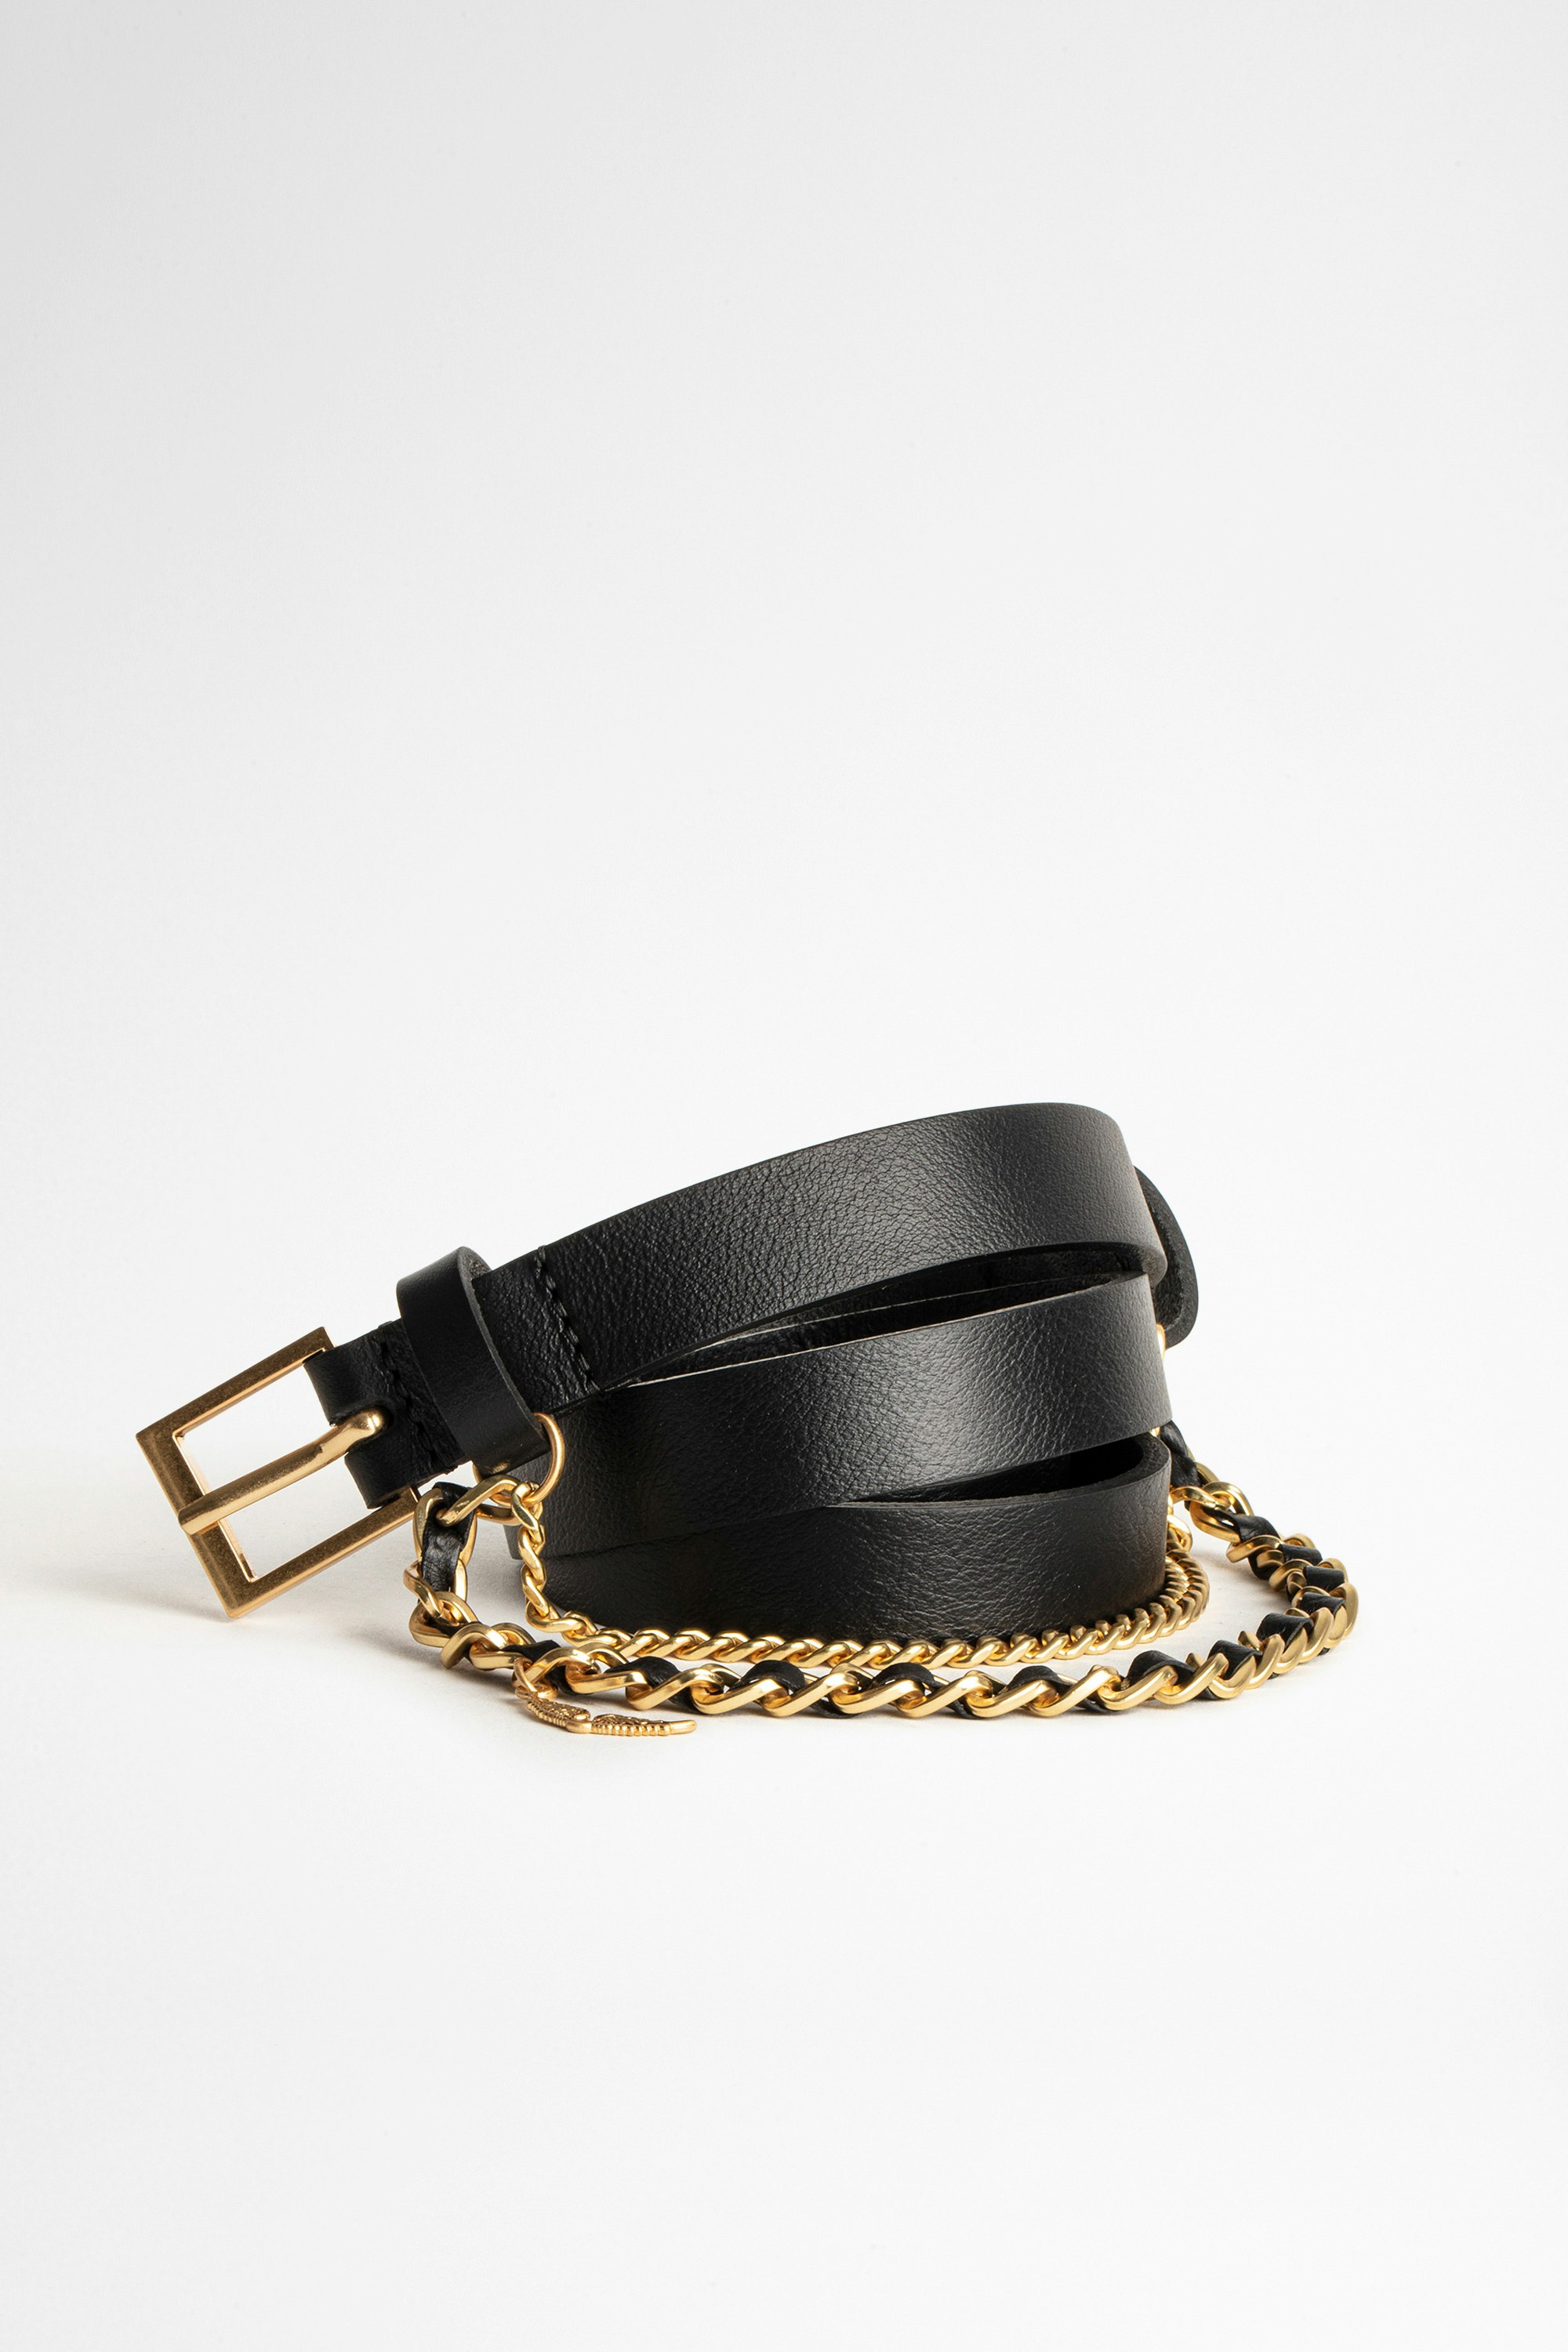 Rock Chain Belt Woman’s Zadig&Voltaire black leather belt with chain.